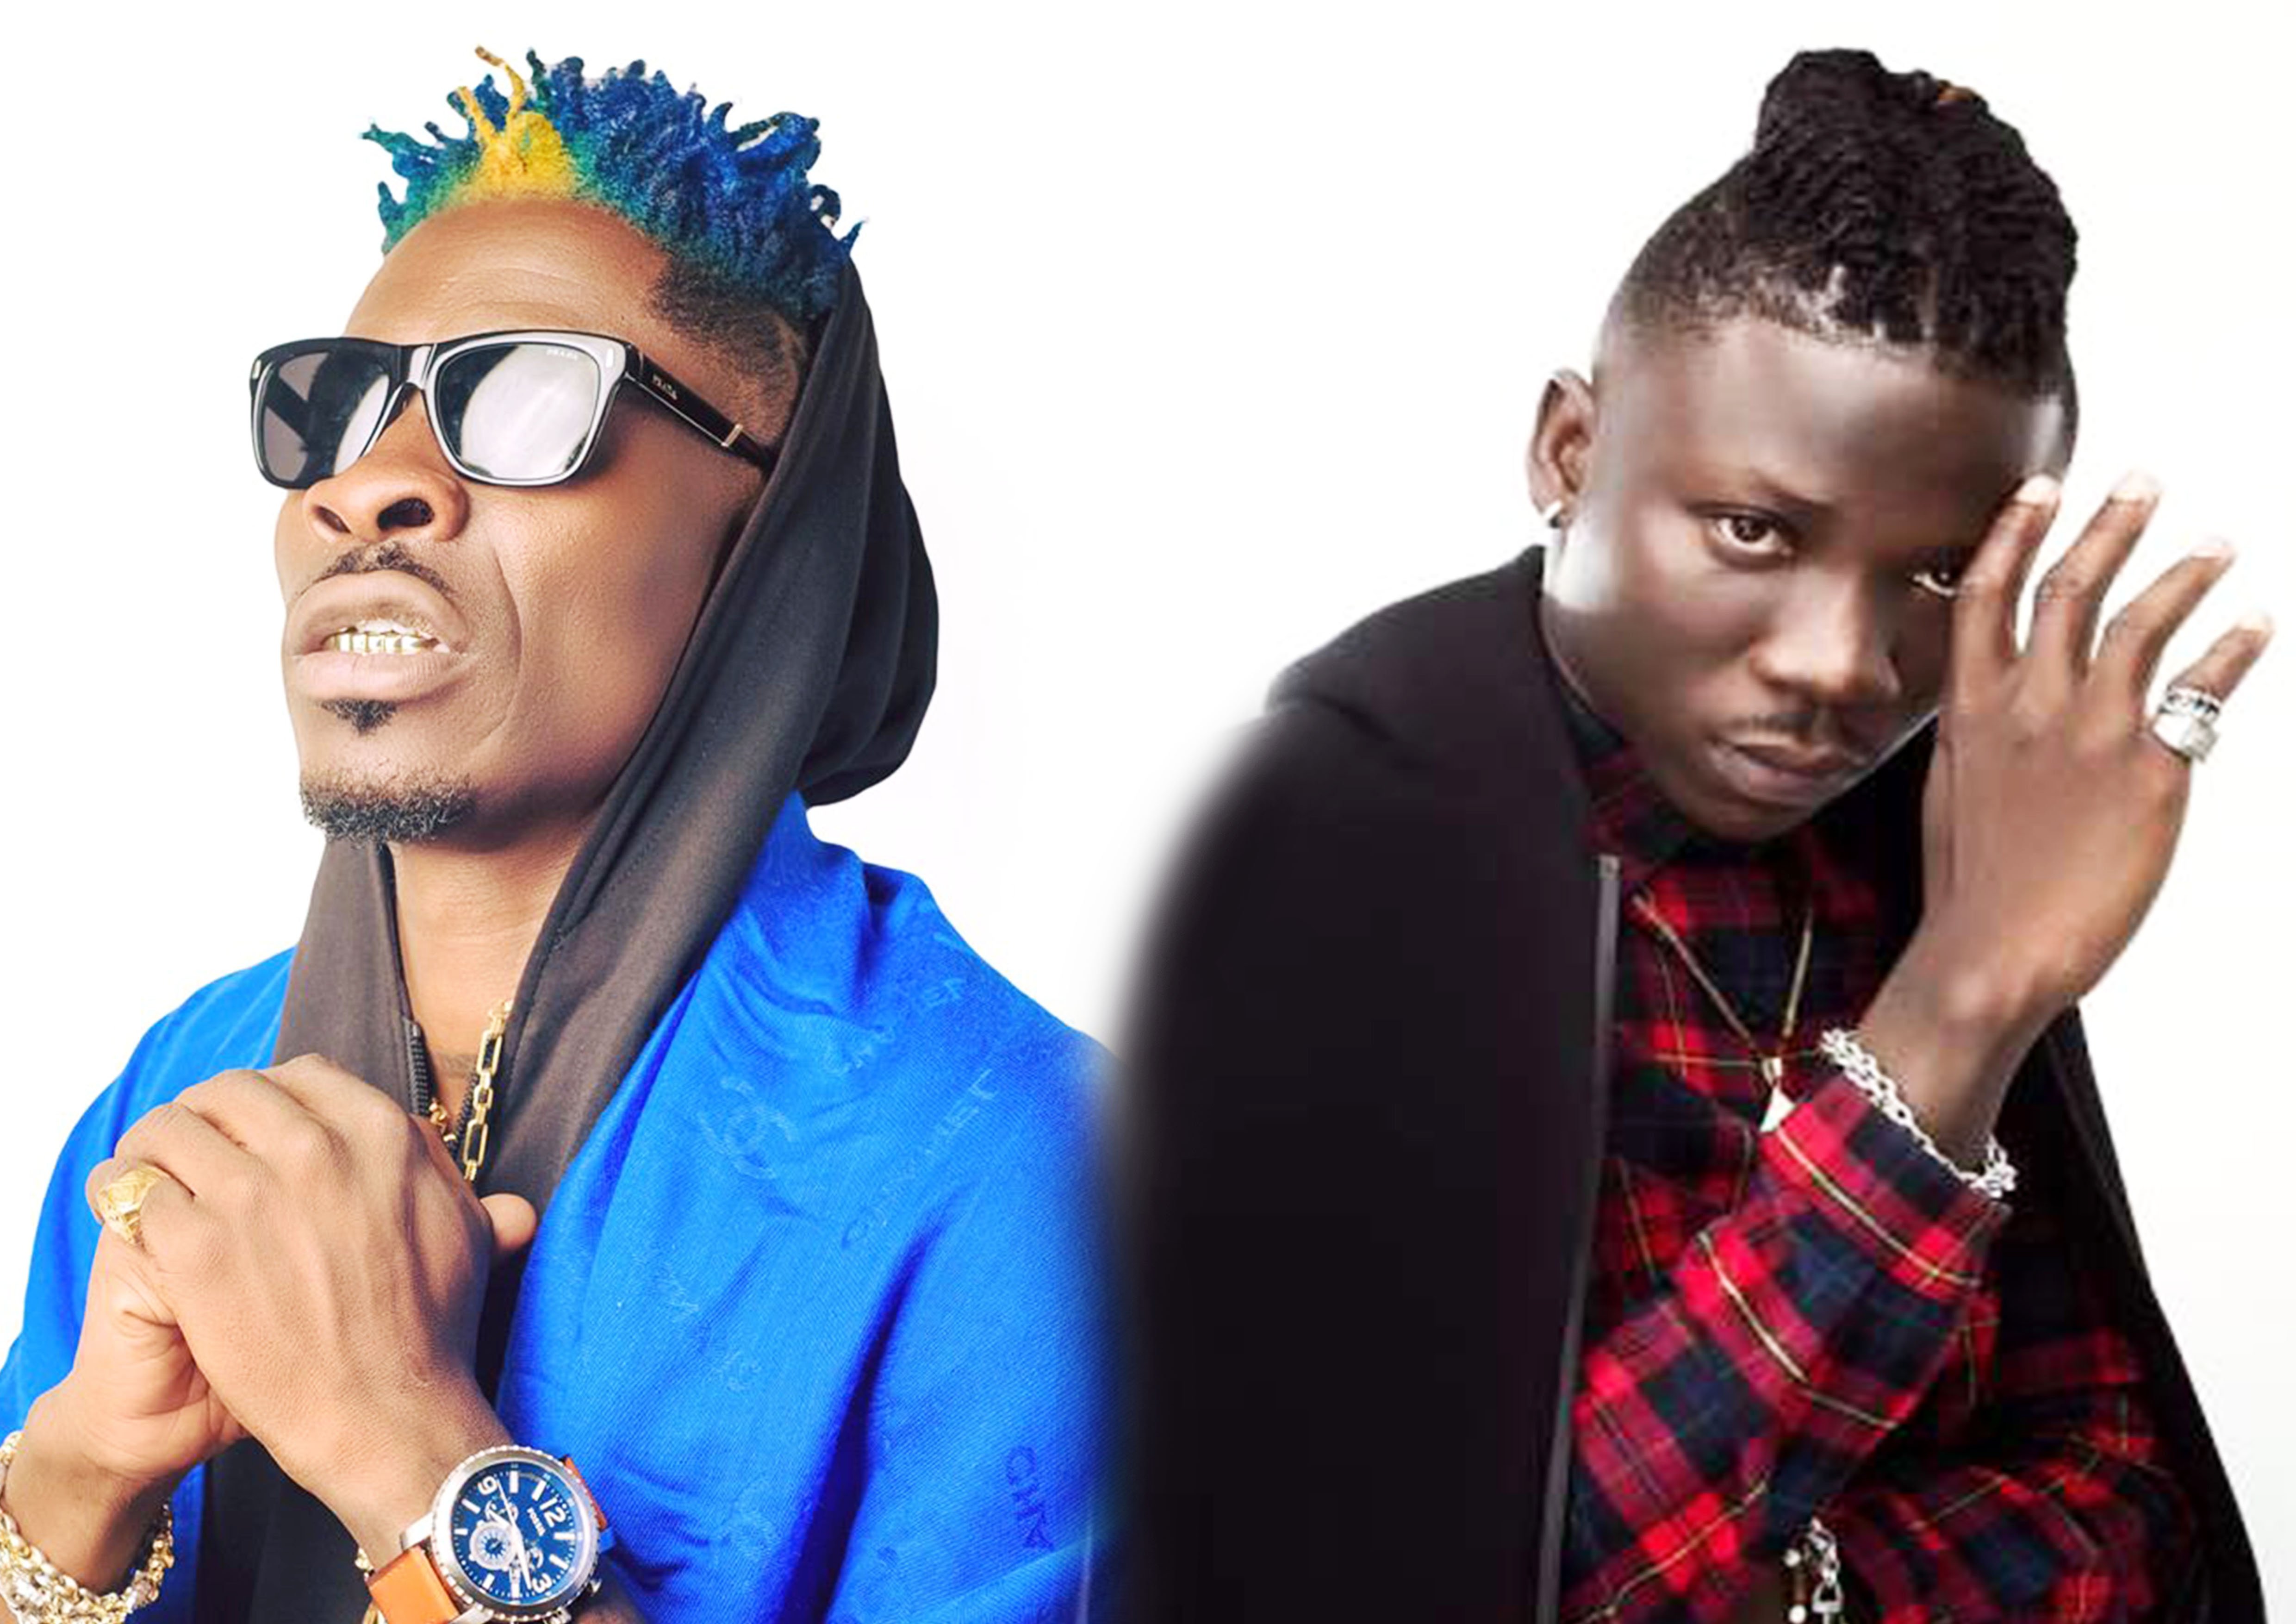 Shatta Wale Comments On Stonebwoy’s #FillTheDome Concert